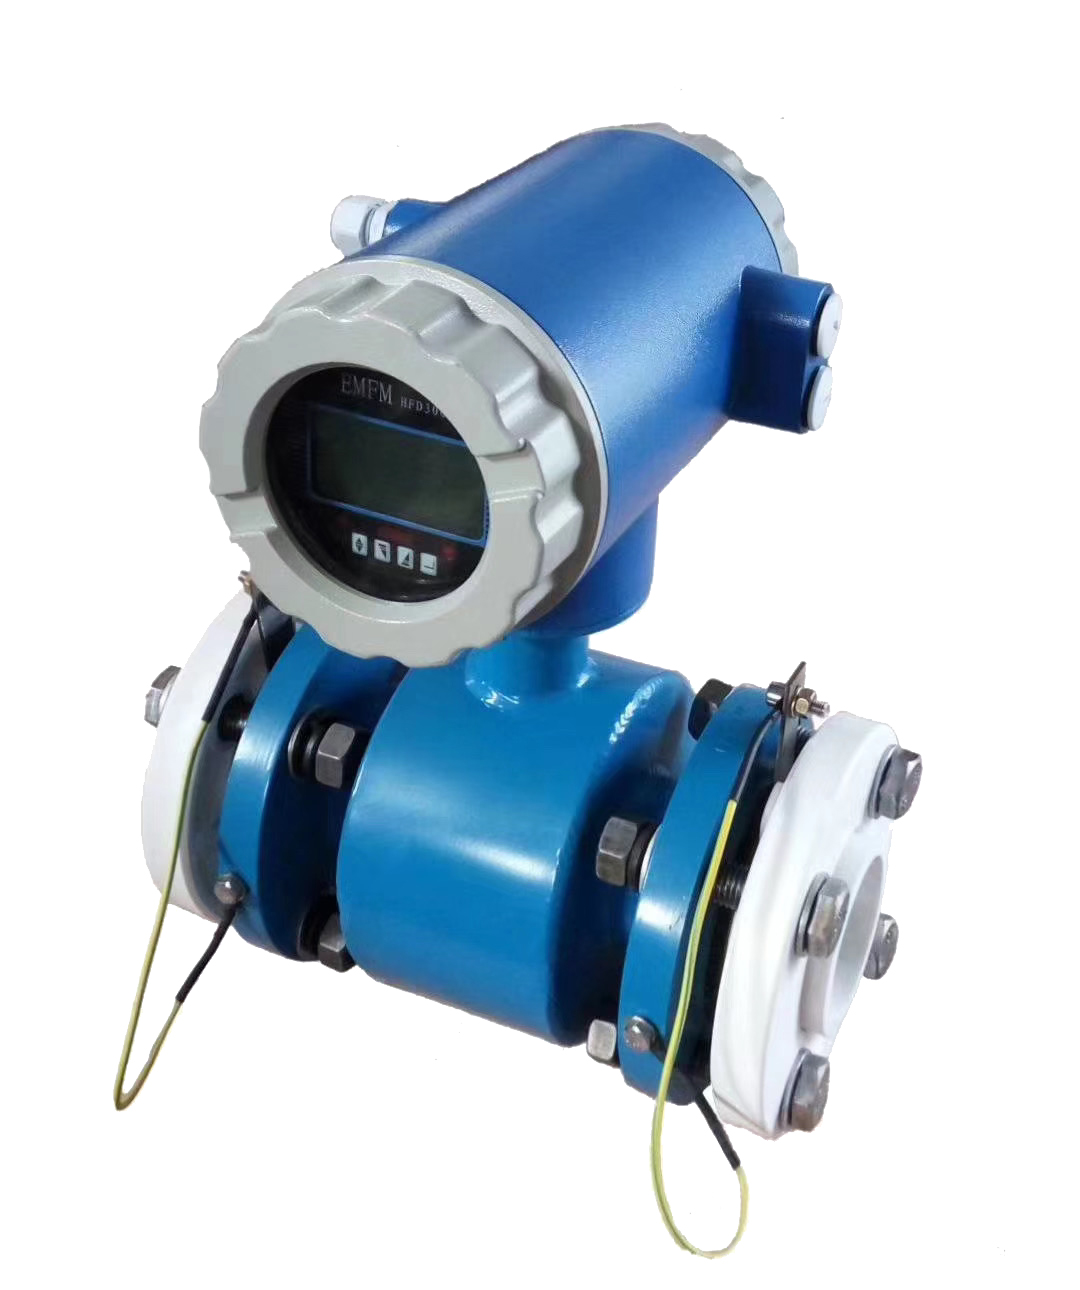 Metery Tech Integrated Display Magnetic Flowmeter Mt100e With Mating Flange Flow Meter Metery